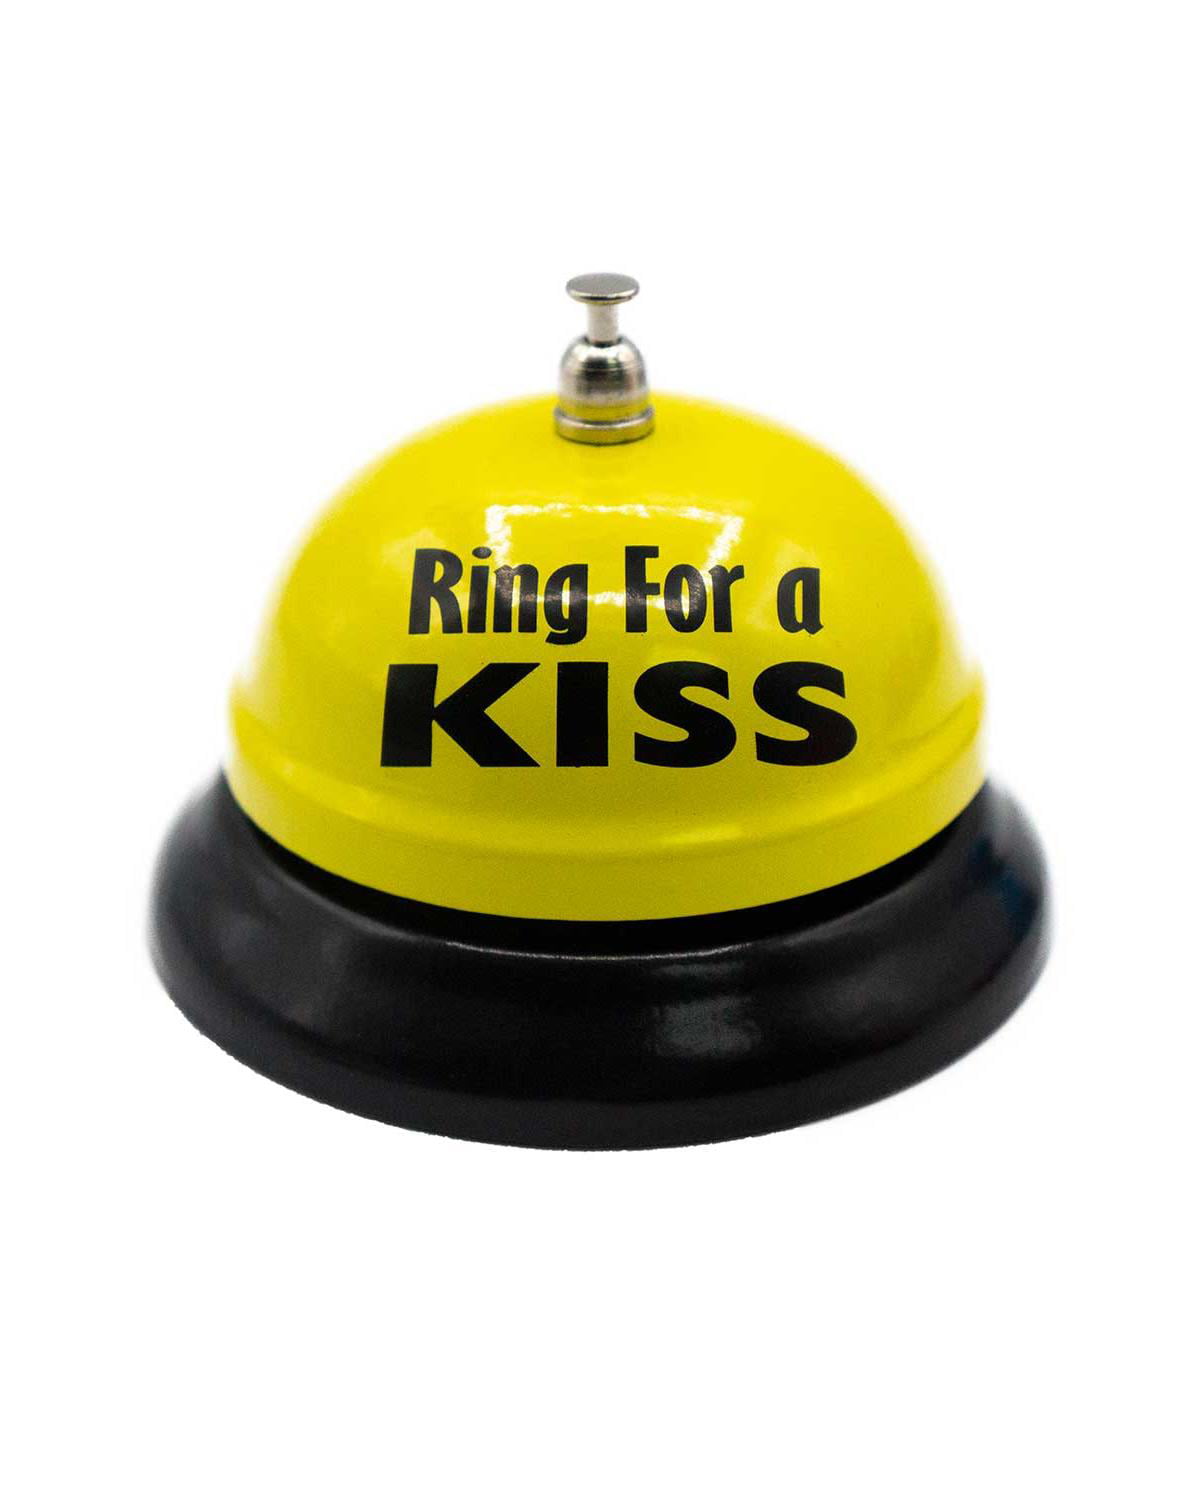 Novelty Yellow Ring Bell Ring for a Kiss Desk Bell Call Bell Party  Accessory, Kiss Yellow, Size: One Size, American Gift 